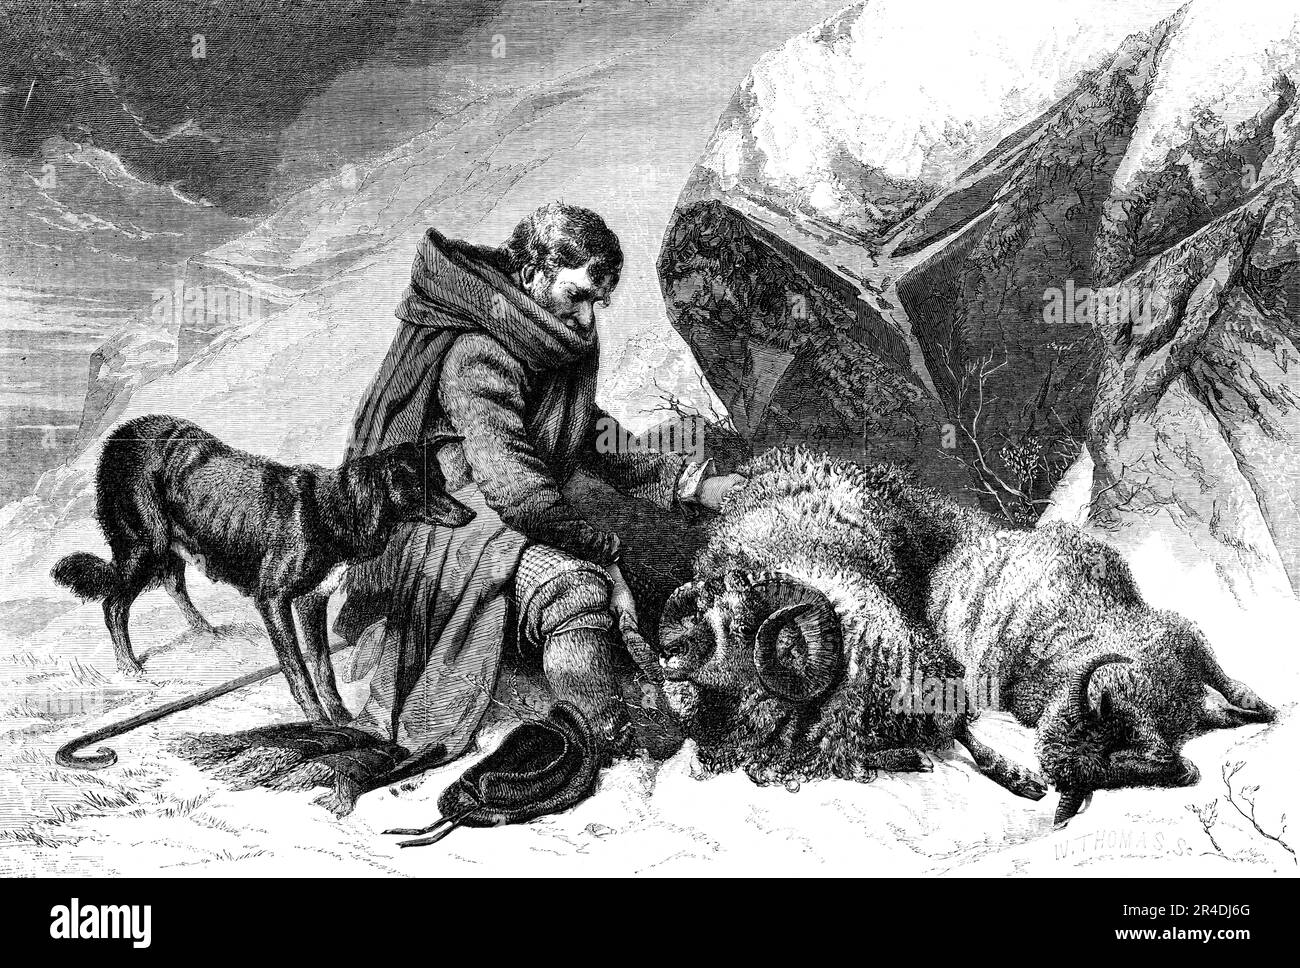 &quot;Severe Weather&quot; - painted by R. Ansdell - from the Exhibition of the British Institution, 1856. Engraving of '...Mr. Ansdell's masterpiece...Very fine and truthful it is. The shepherd and his dogs are equally cowering from the cold, bitter, biting blast that blows so pinchingly on the stones which serve (but indifferently) to protect them from a Scottish north-east wind. Very life-like is the entire scene. True to Highland characteristics and Highland nature'. From &quot;Illustrated London News&quot;, 1856. Stock Photo